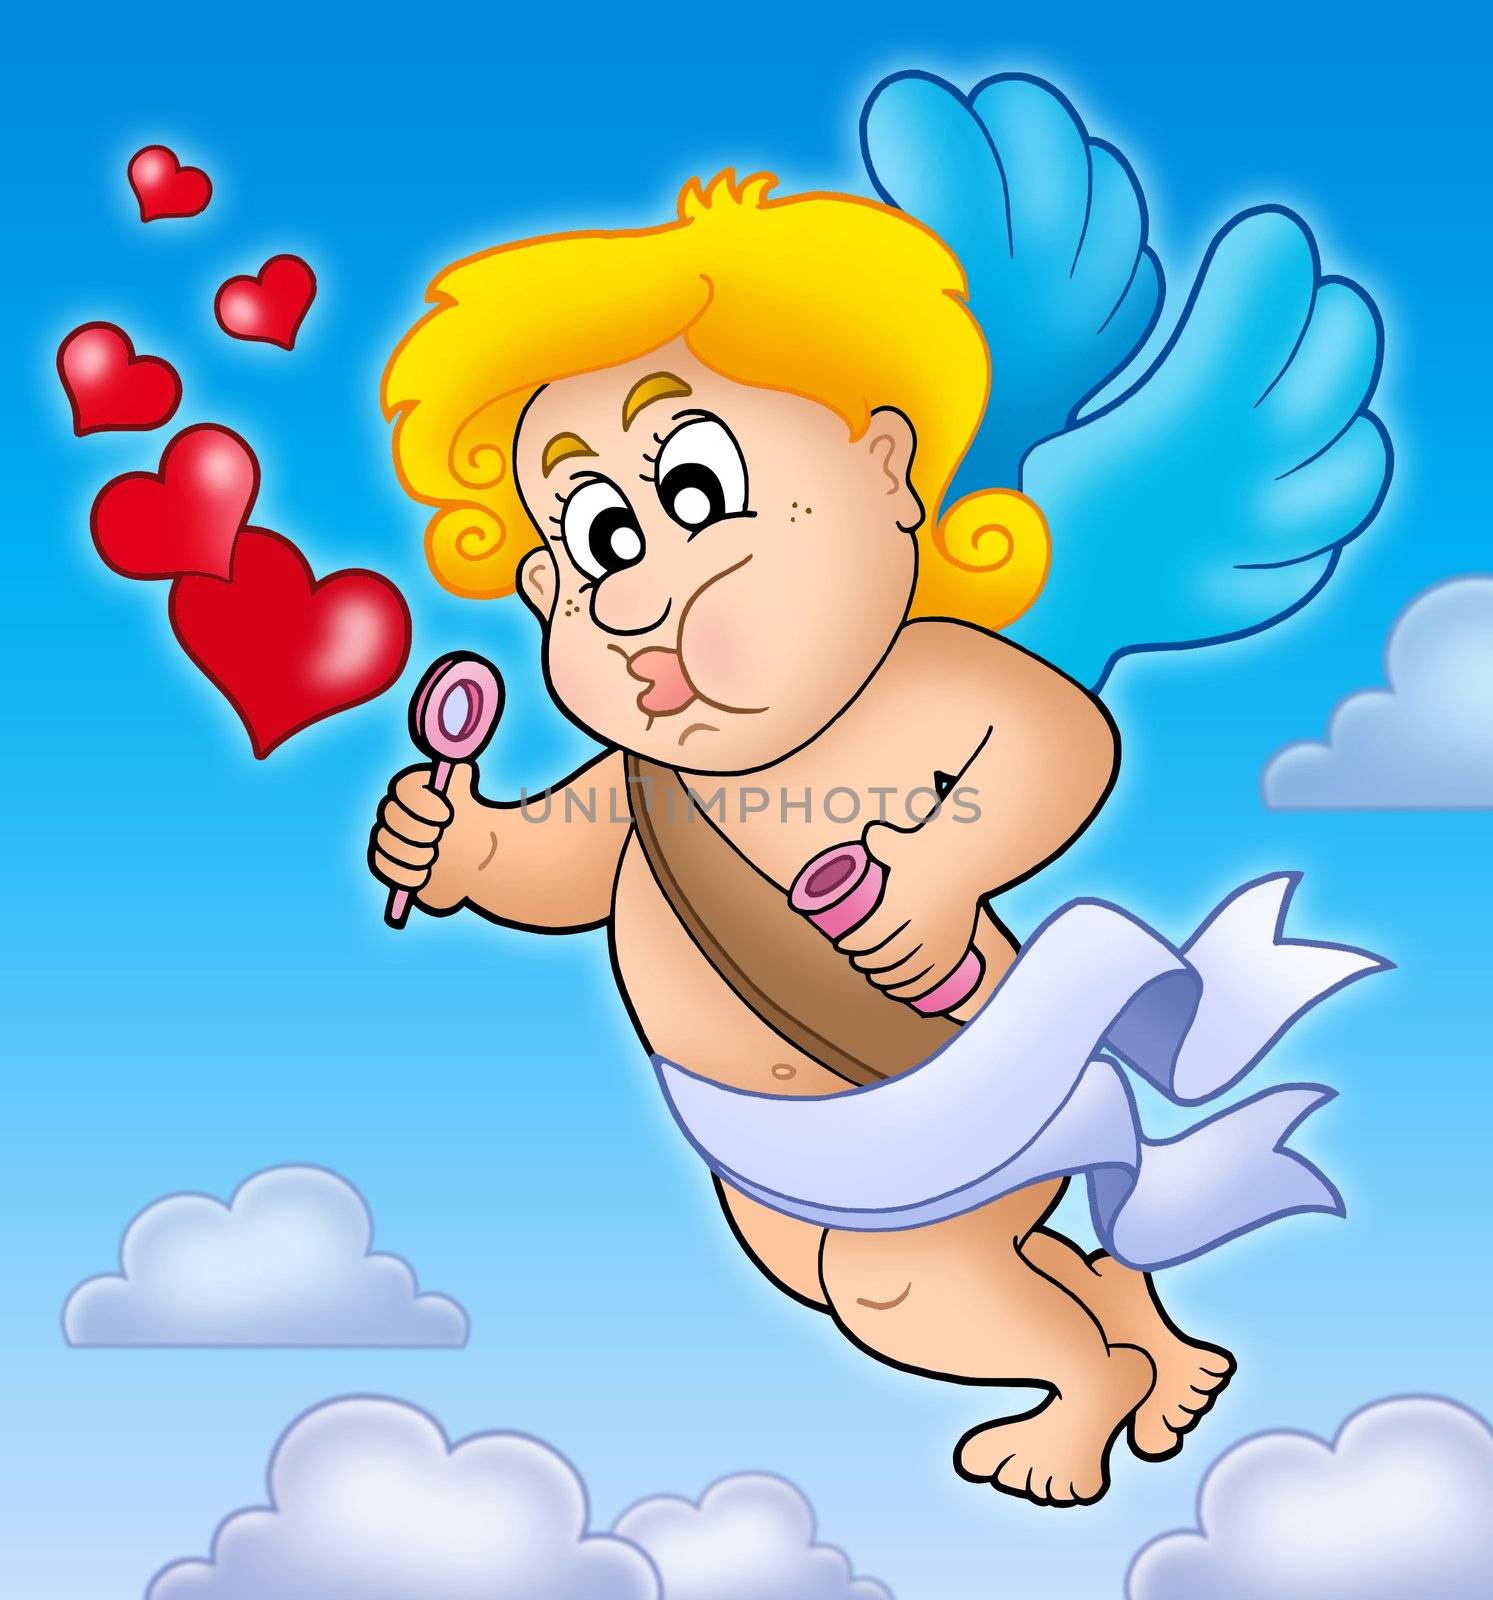 Valentine Cupid with bubble maker - color illustration.